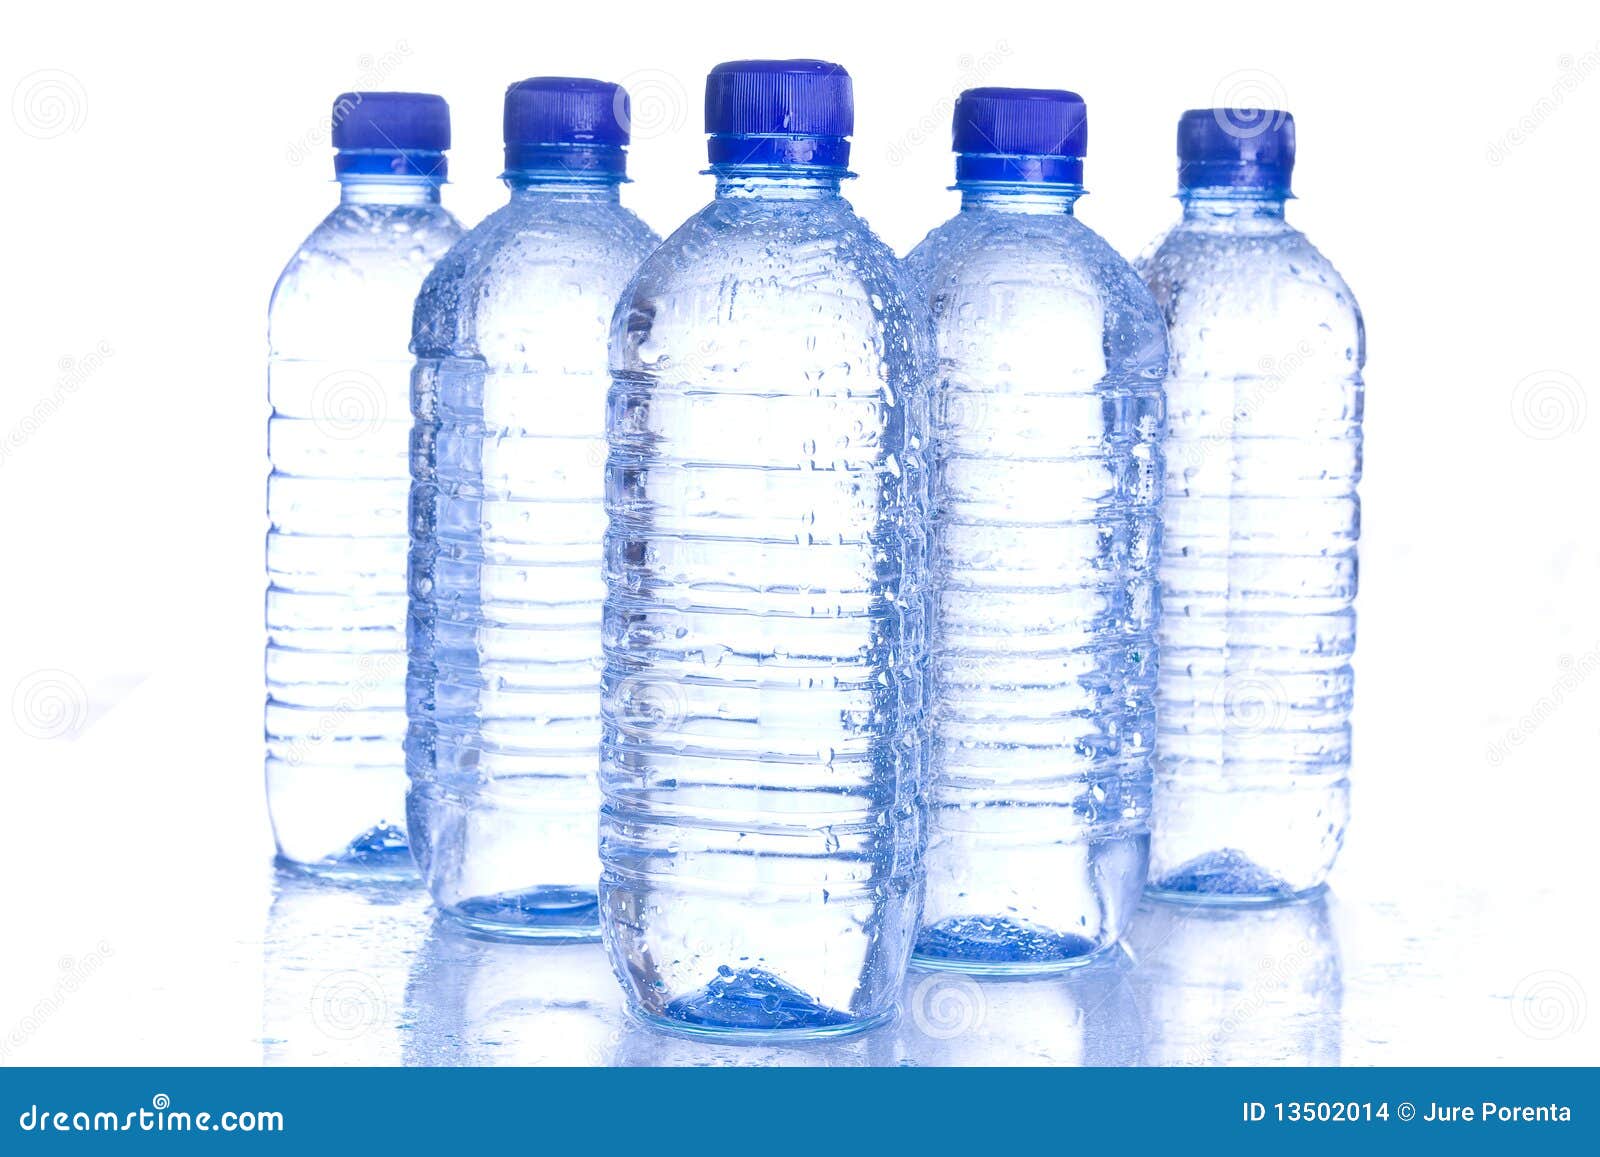 Plastic Water Bottles Stock Images - Image: 13502014